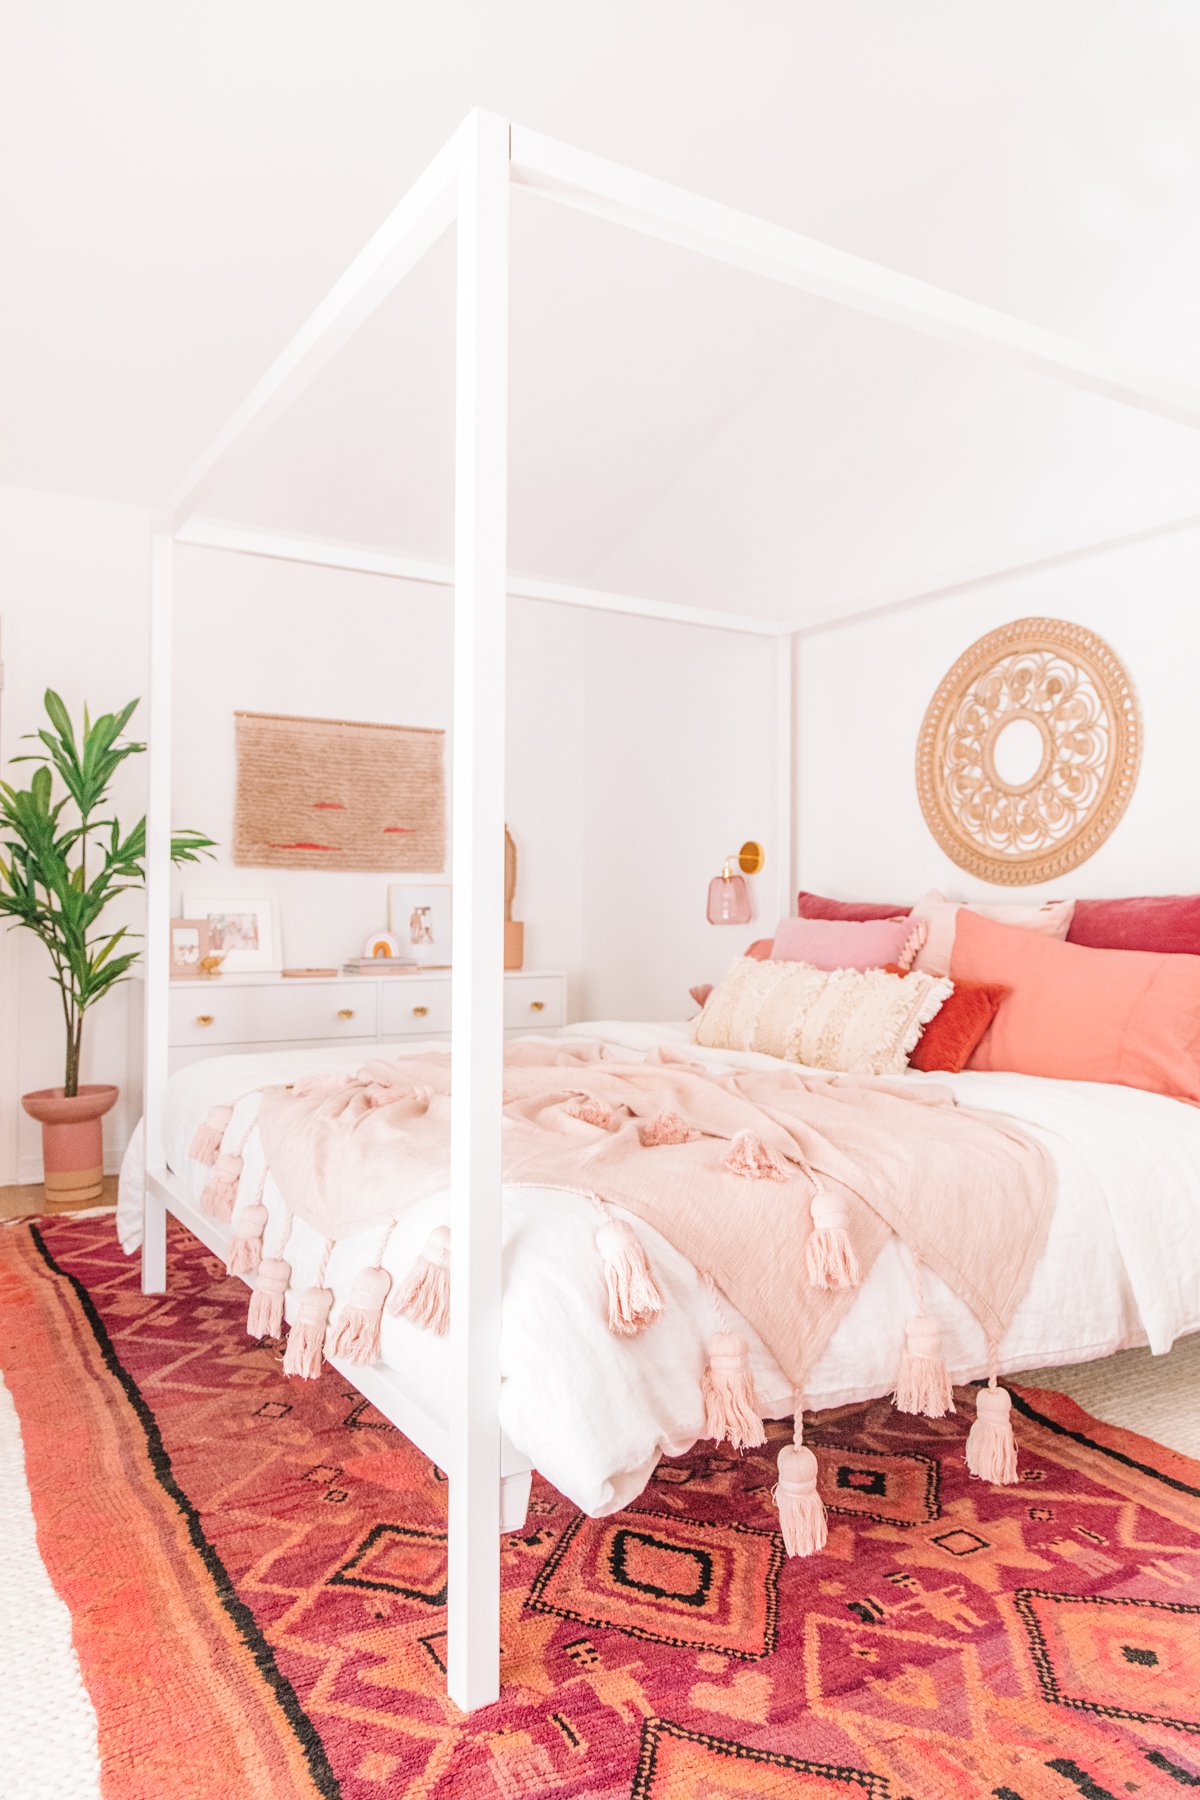 Get decor ideas in this Woodsy Bedroom Makeover reveal.